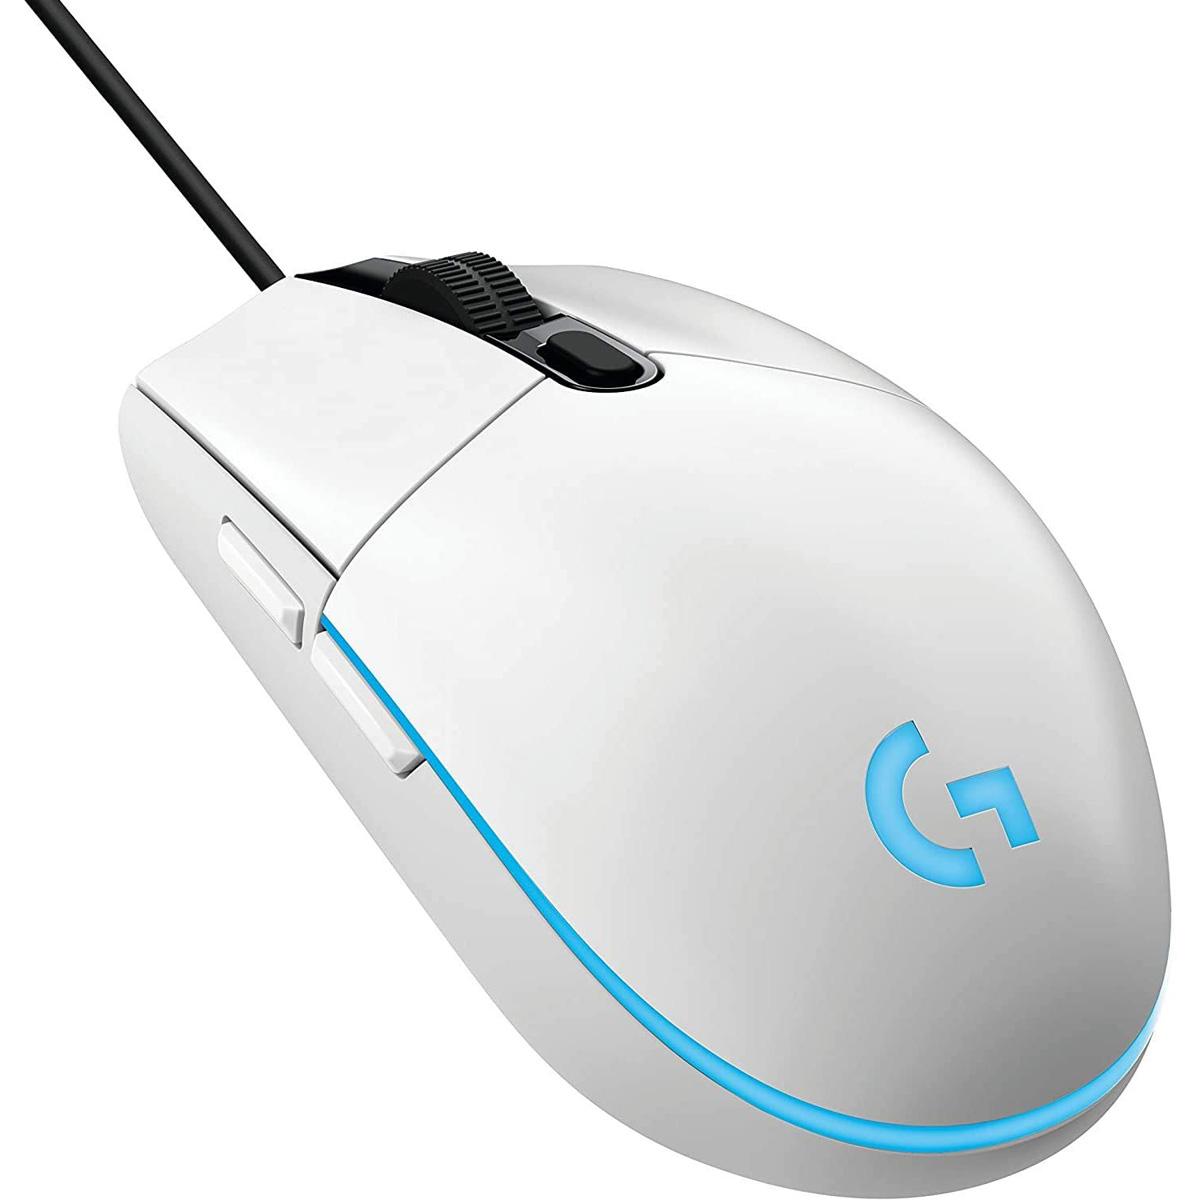 Logitech G203 Lightsync Wired Gaming Mouse for $14.99